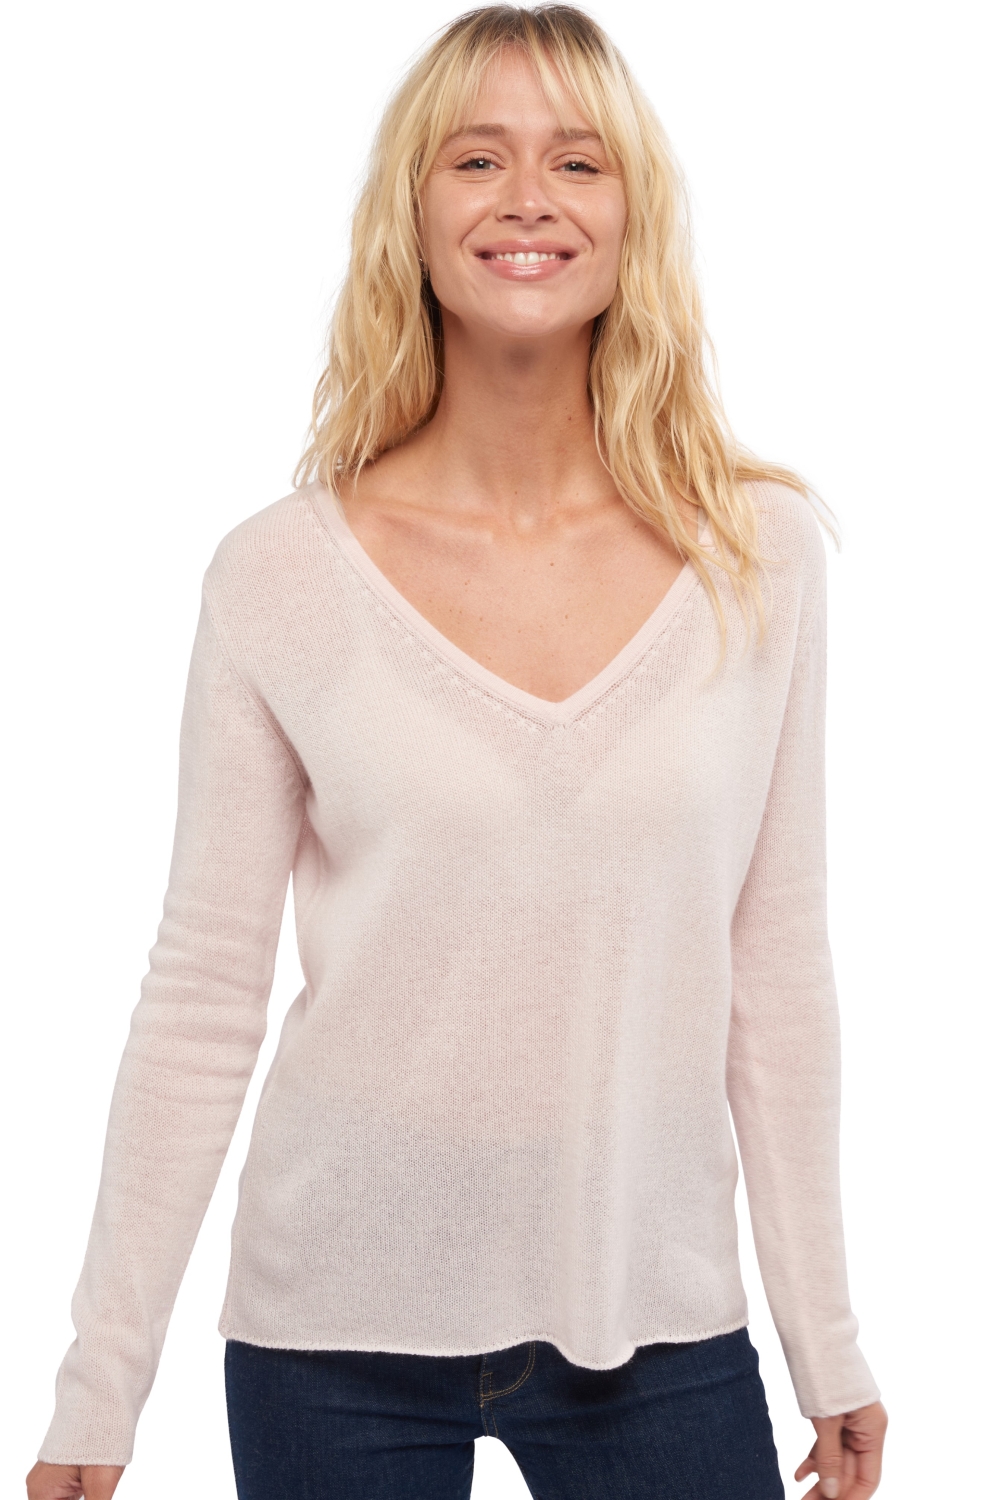 Cashmere ladies basic sweaters at low prices flavie shinking violet xs